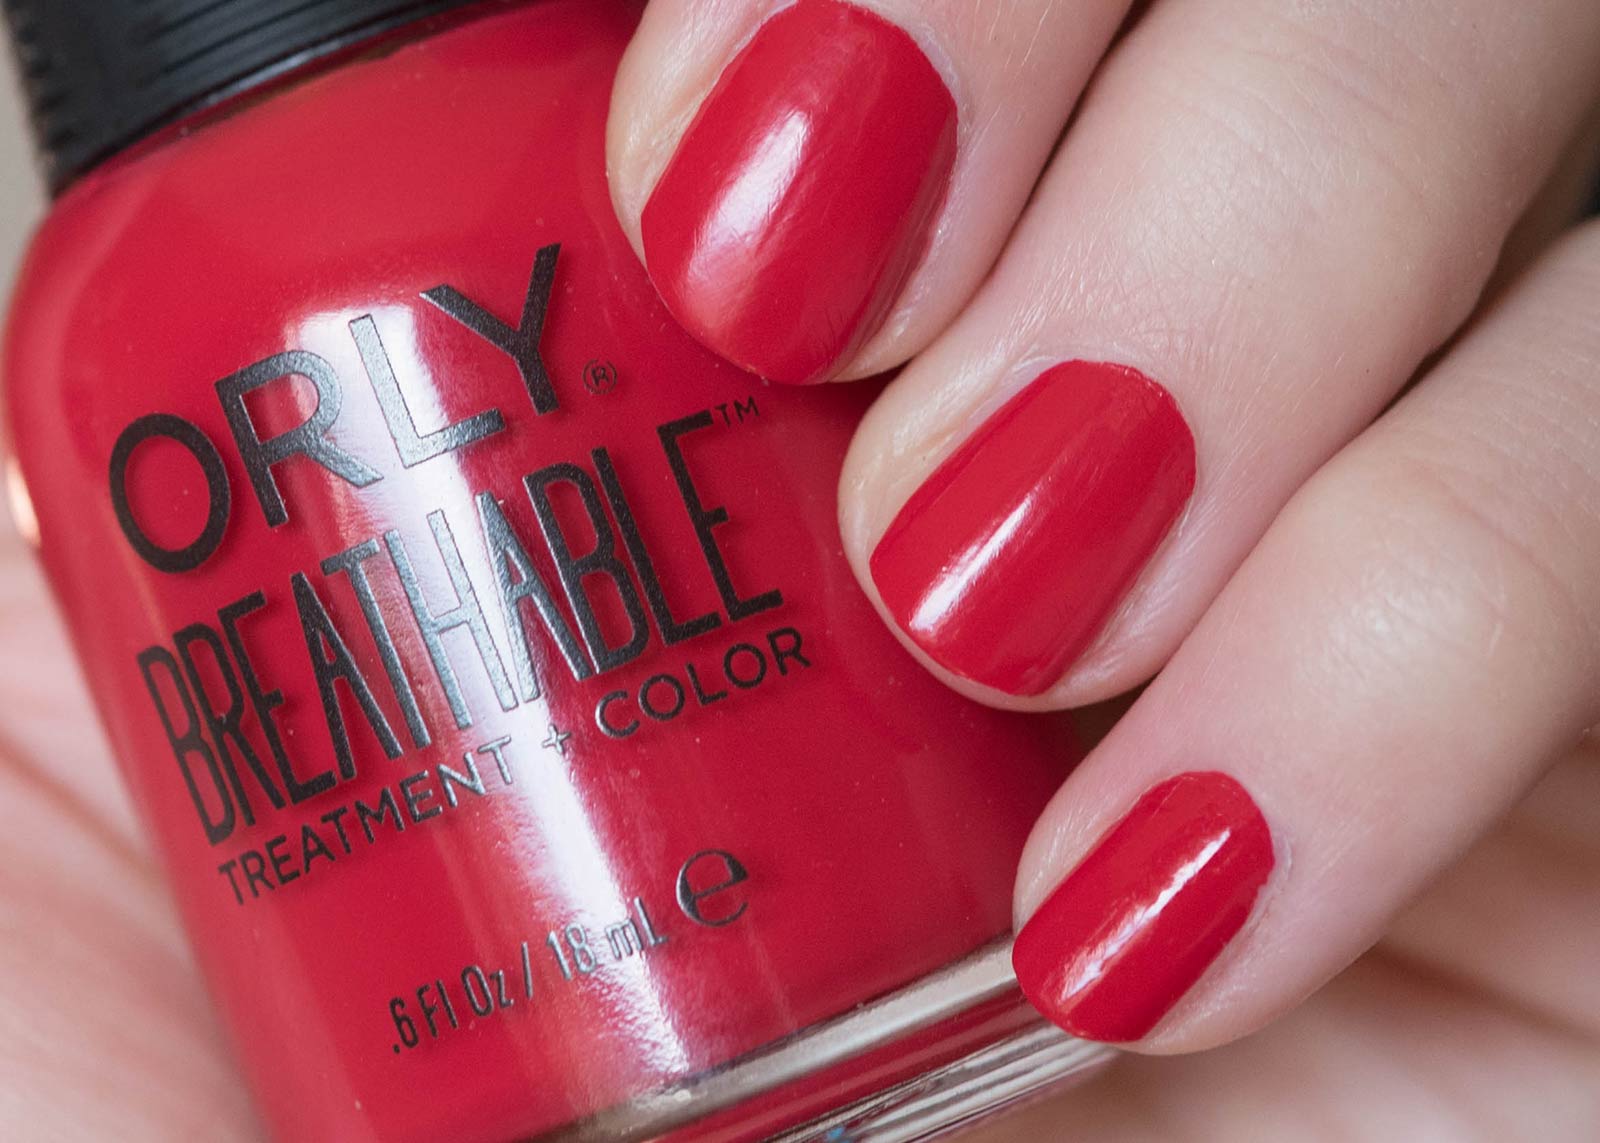 10. Orly Breathable Treatment + Color Nail Polish in "Love My Nails" - wide 6